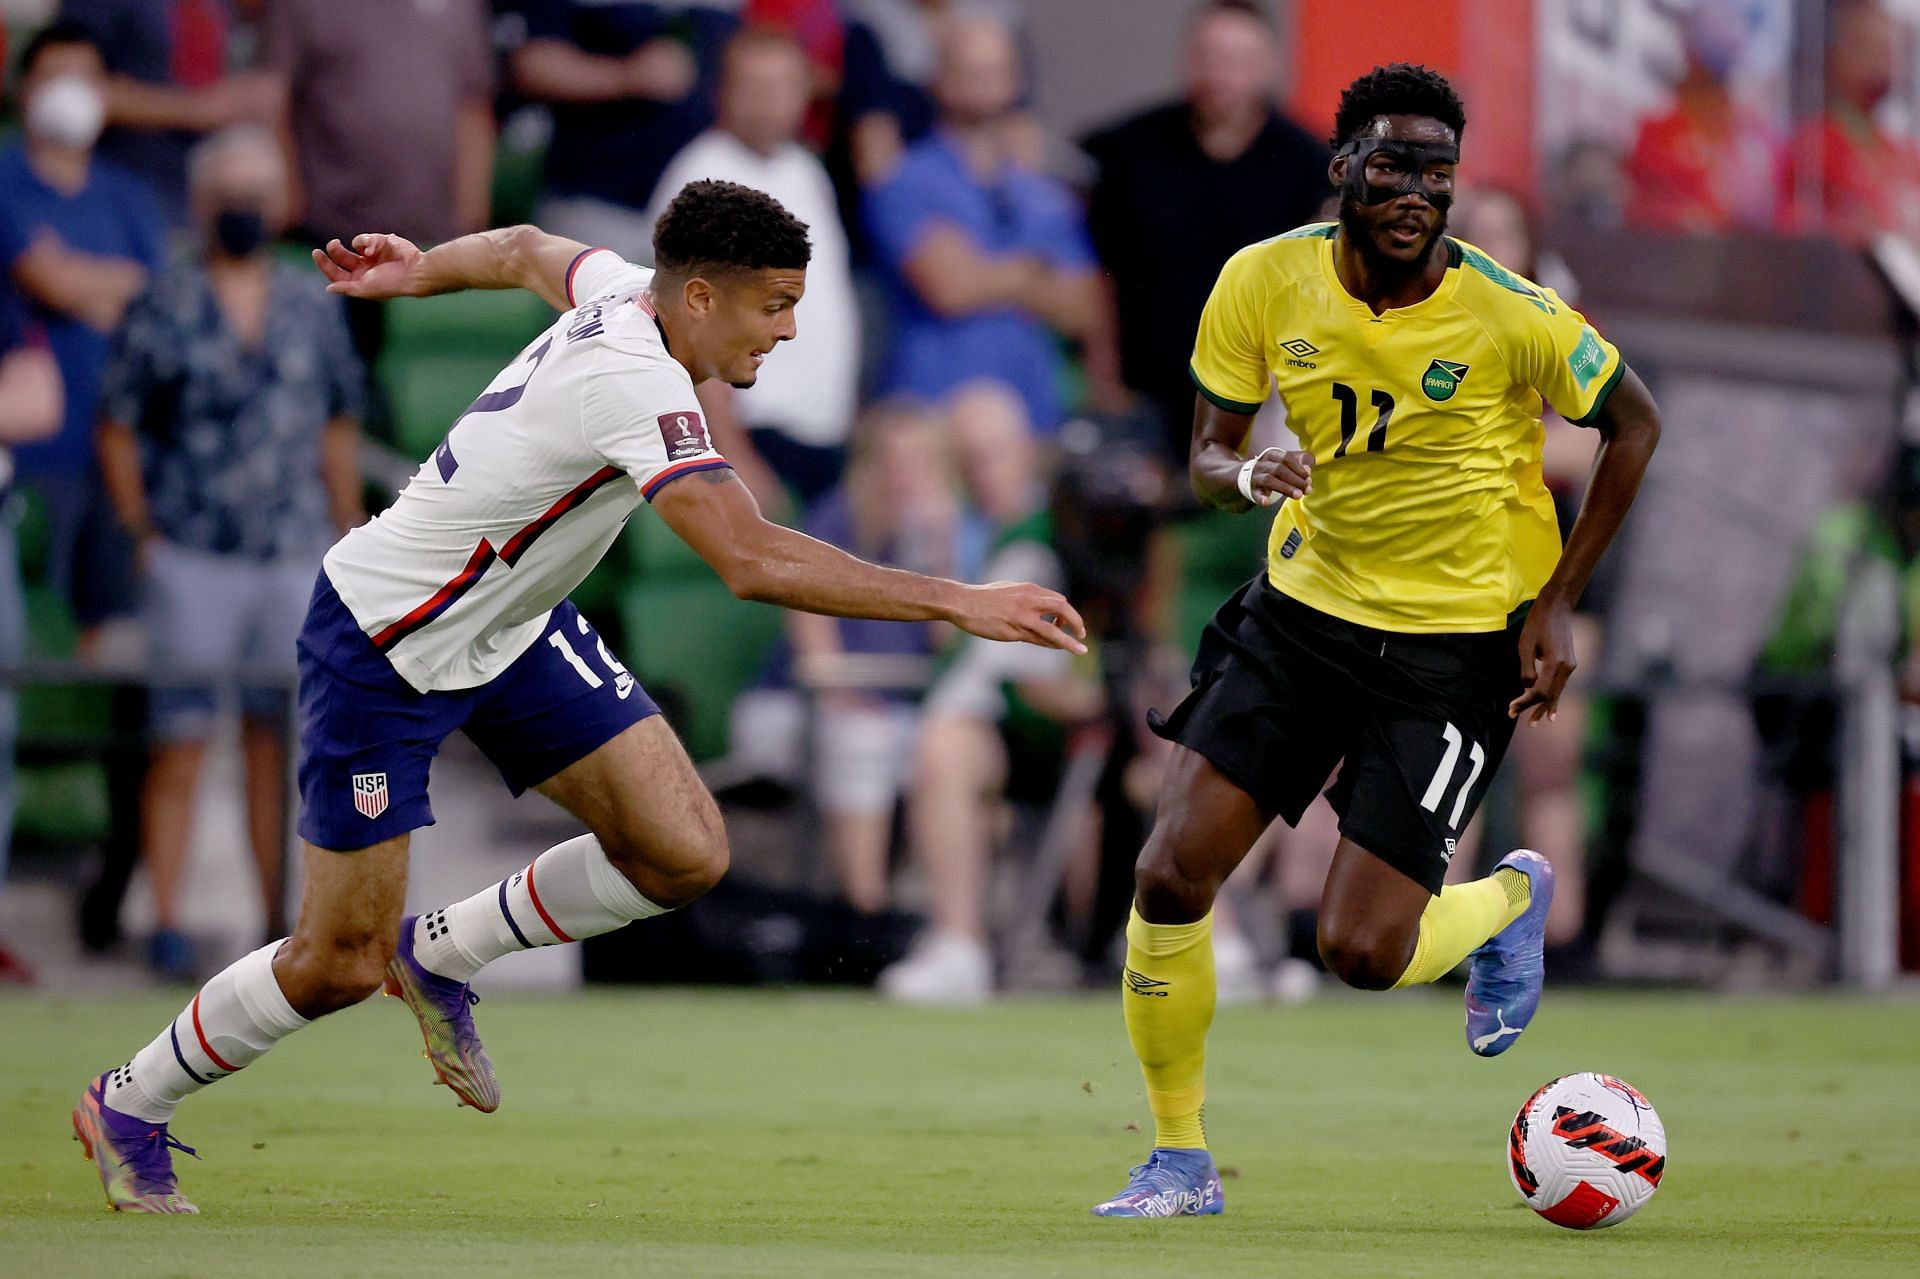 Jamaica will face Suriname on Wednesday - 2022 CONCACAF Nations League